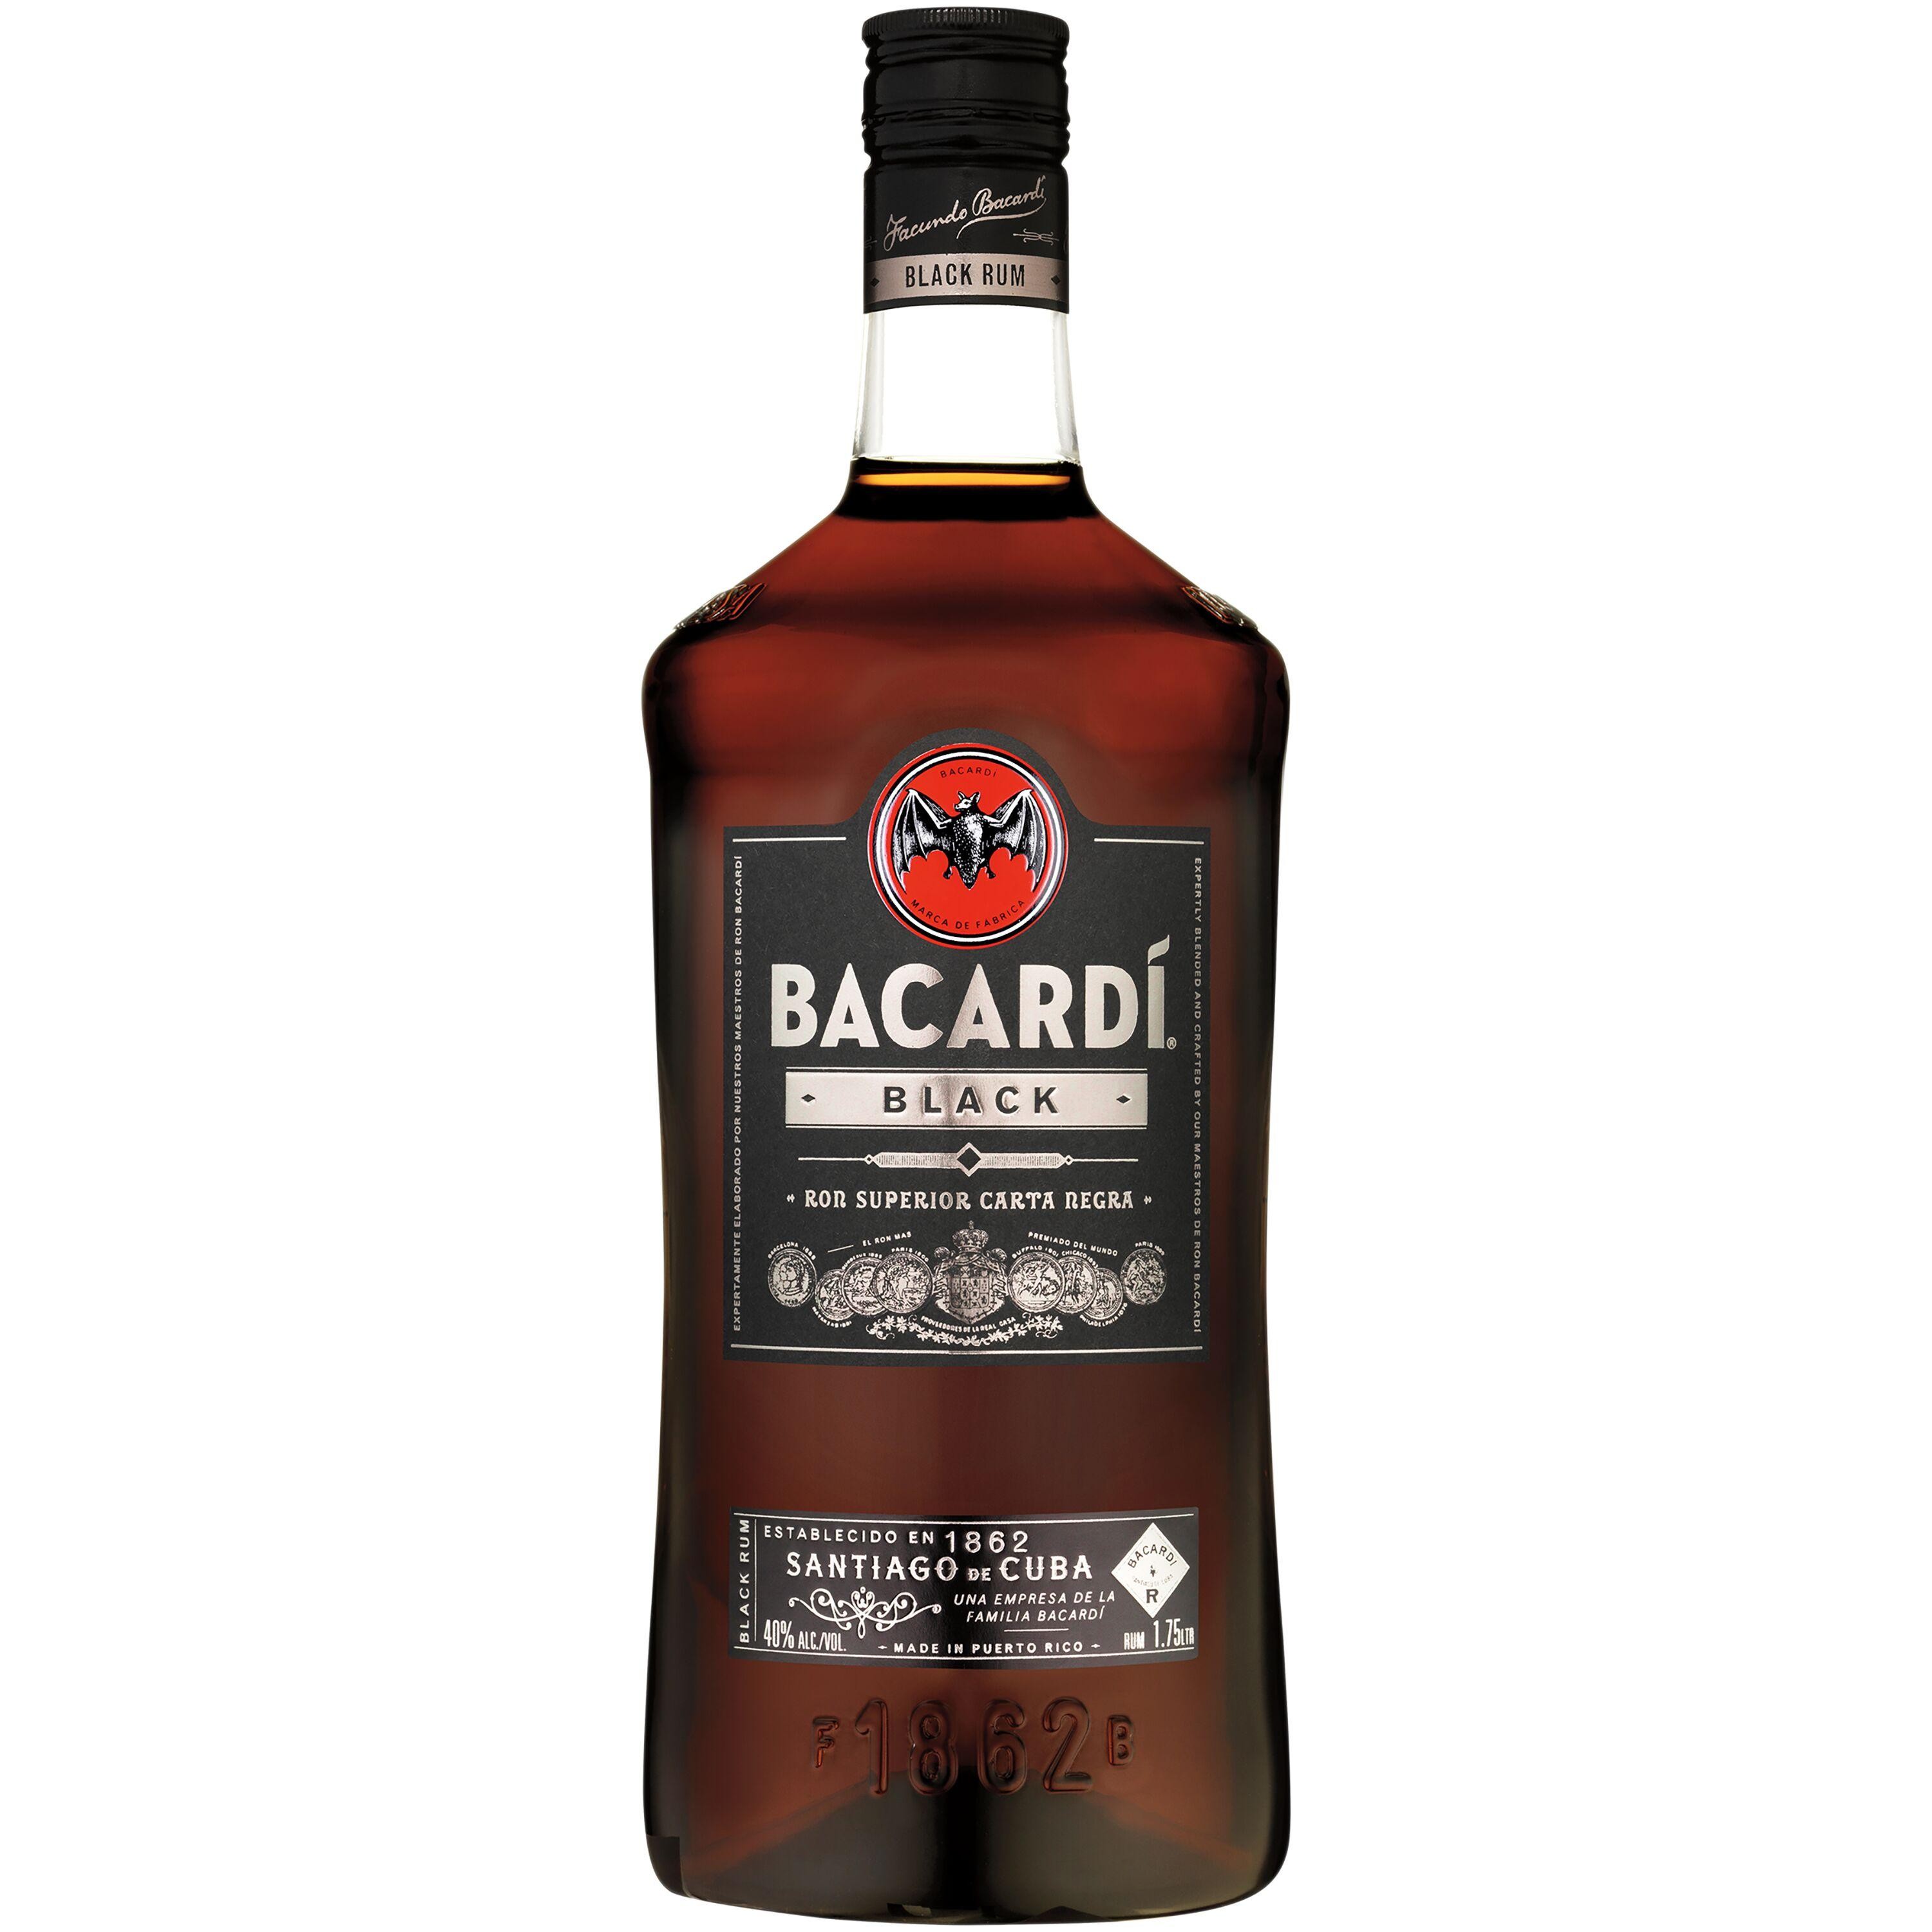 Black | Spiced Rum by Bacardi | 1.75L | Puerto Rico